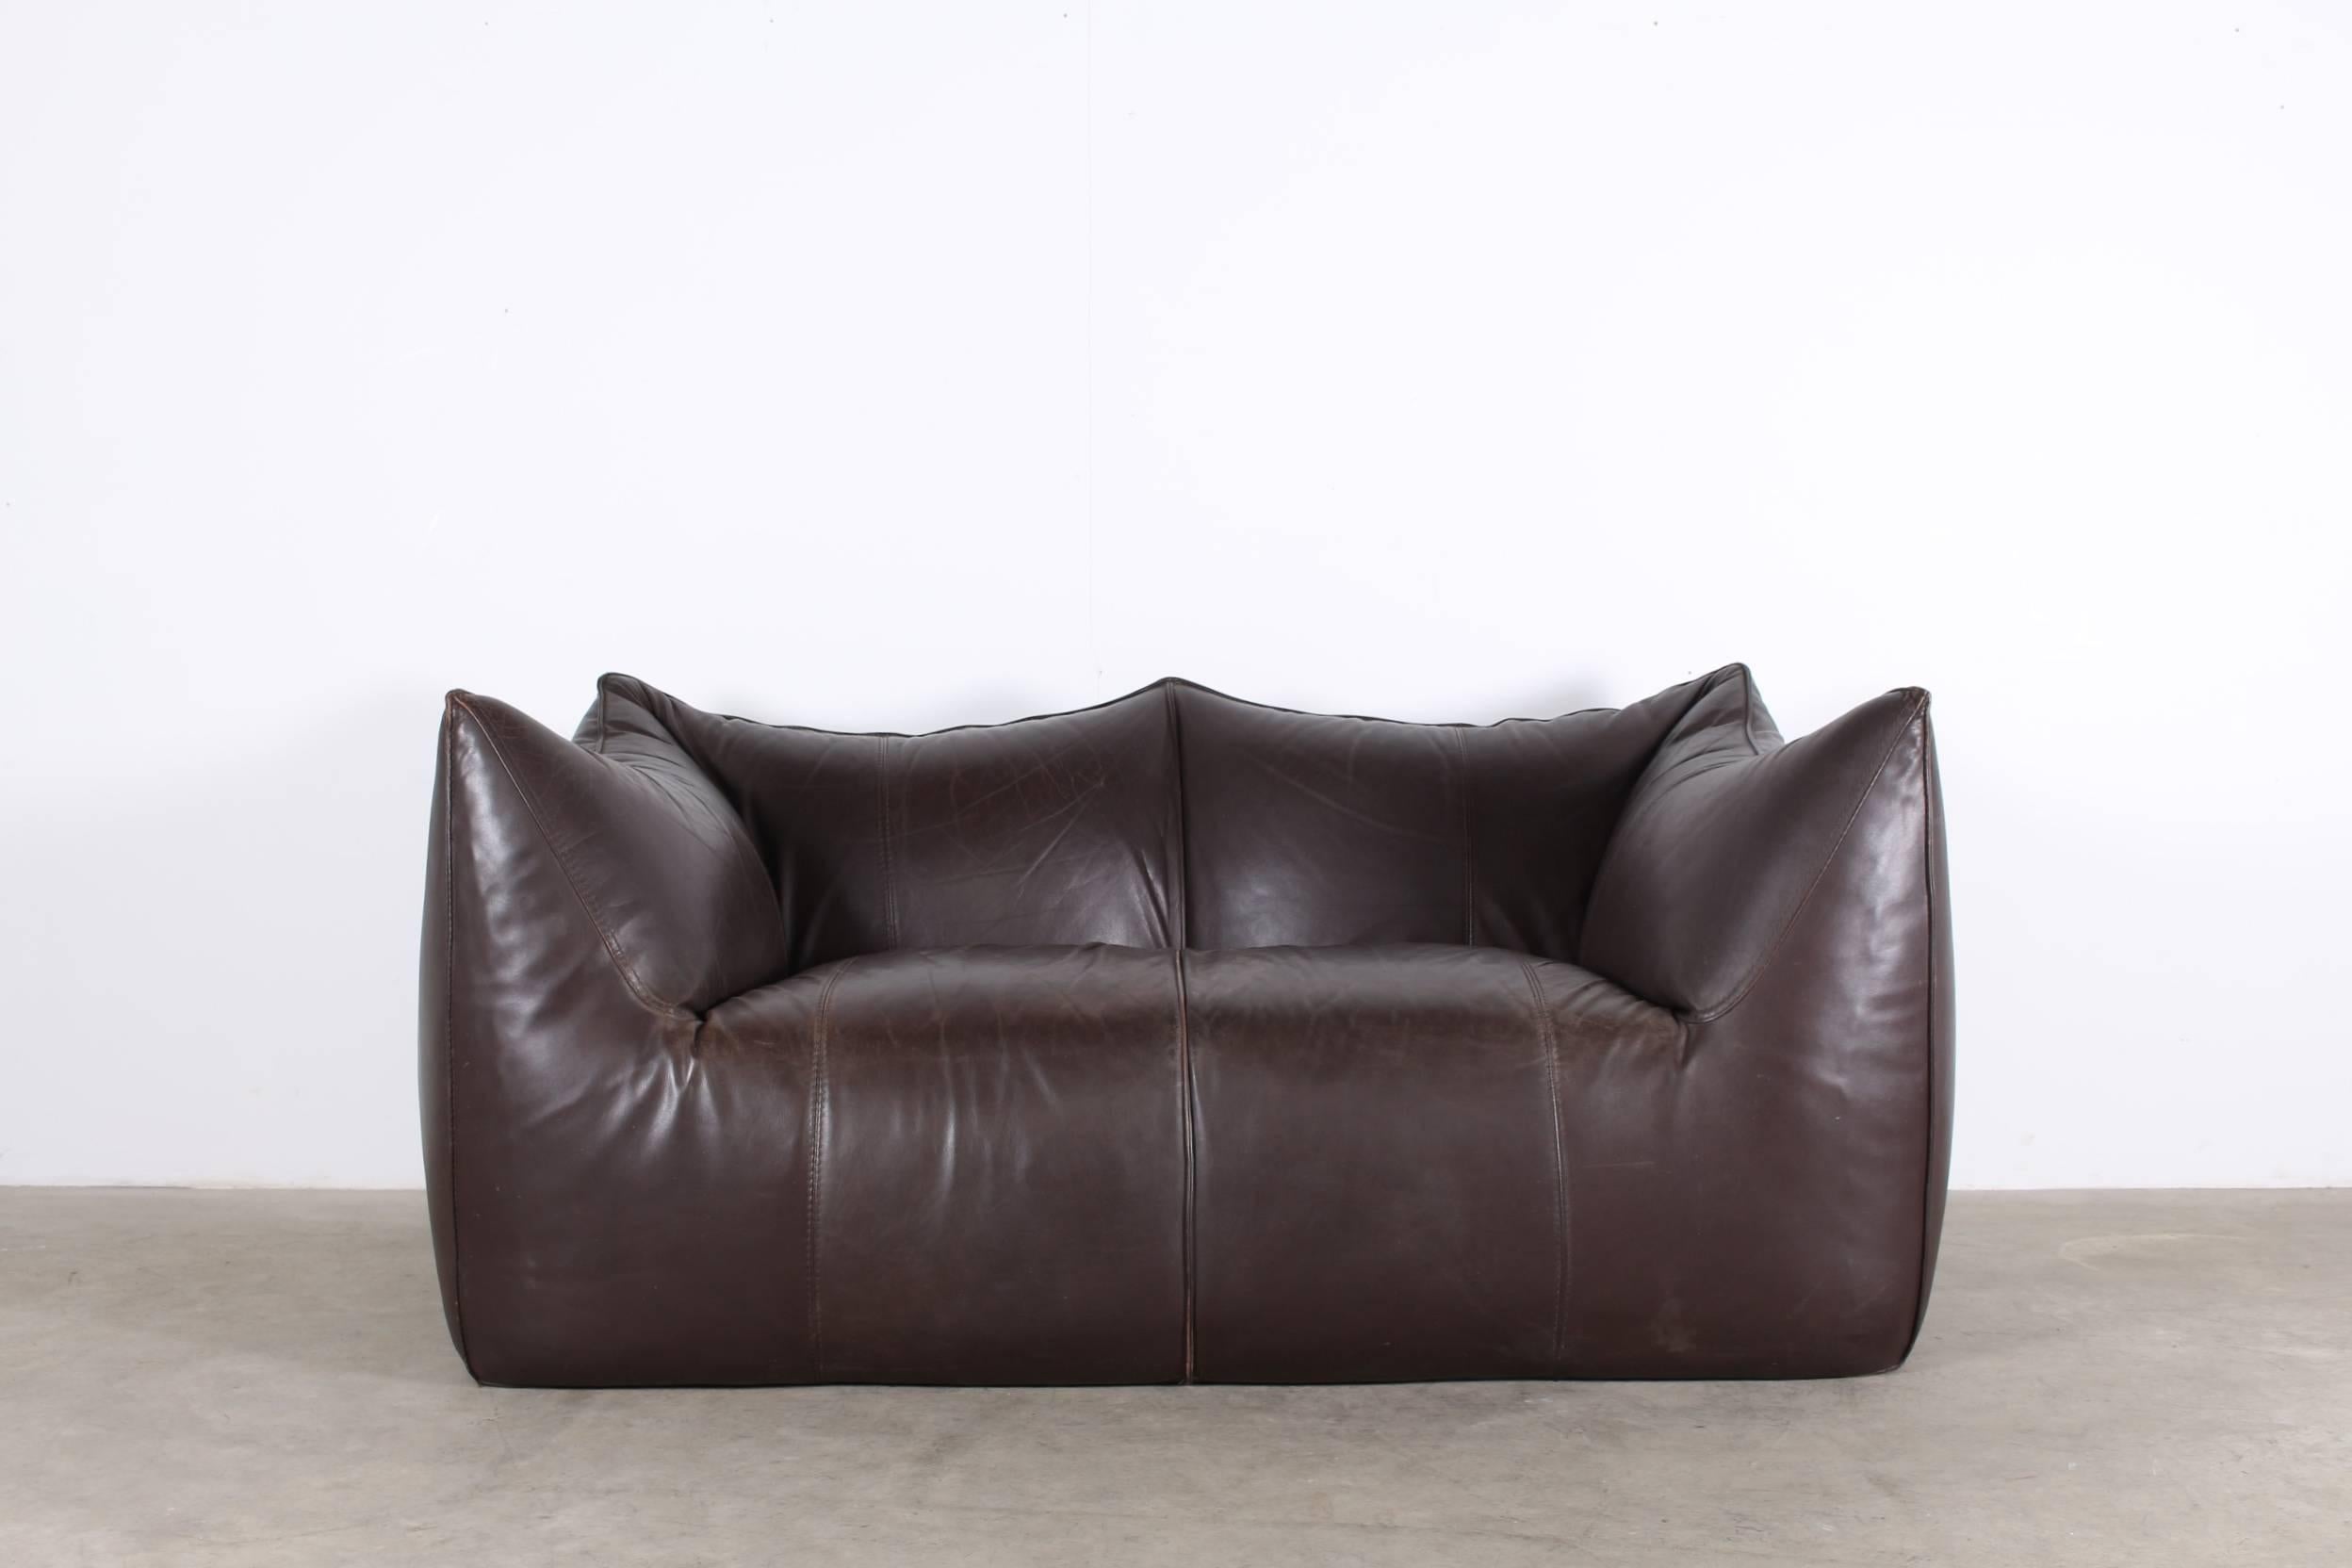 An extremely comfortable Bellini brown leather sofa in great condition.
Original color.